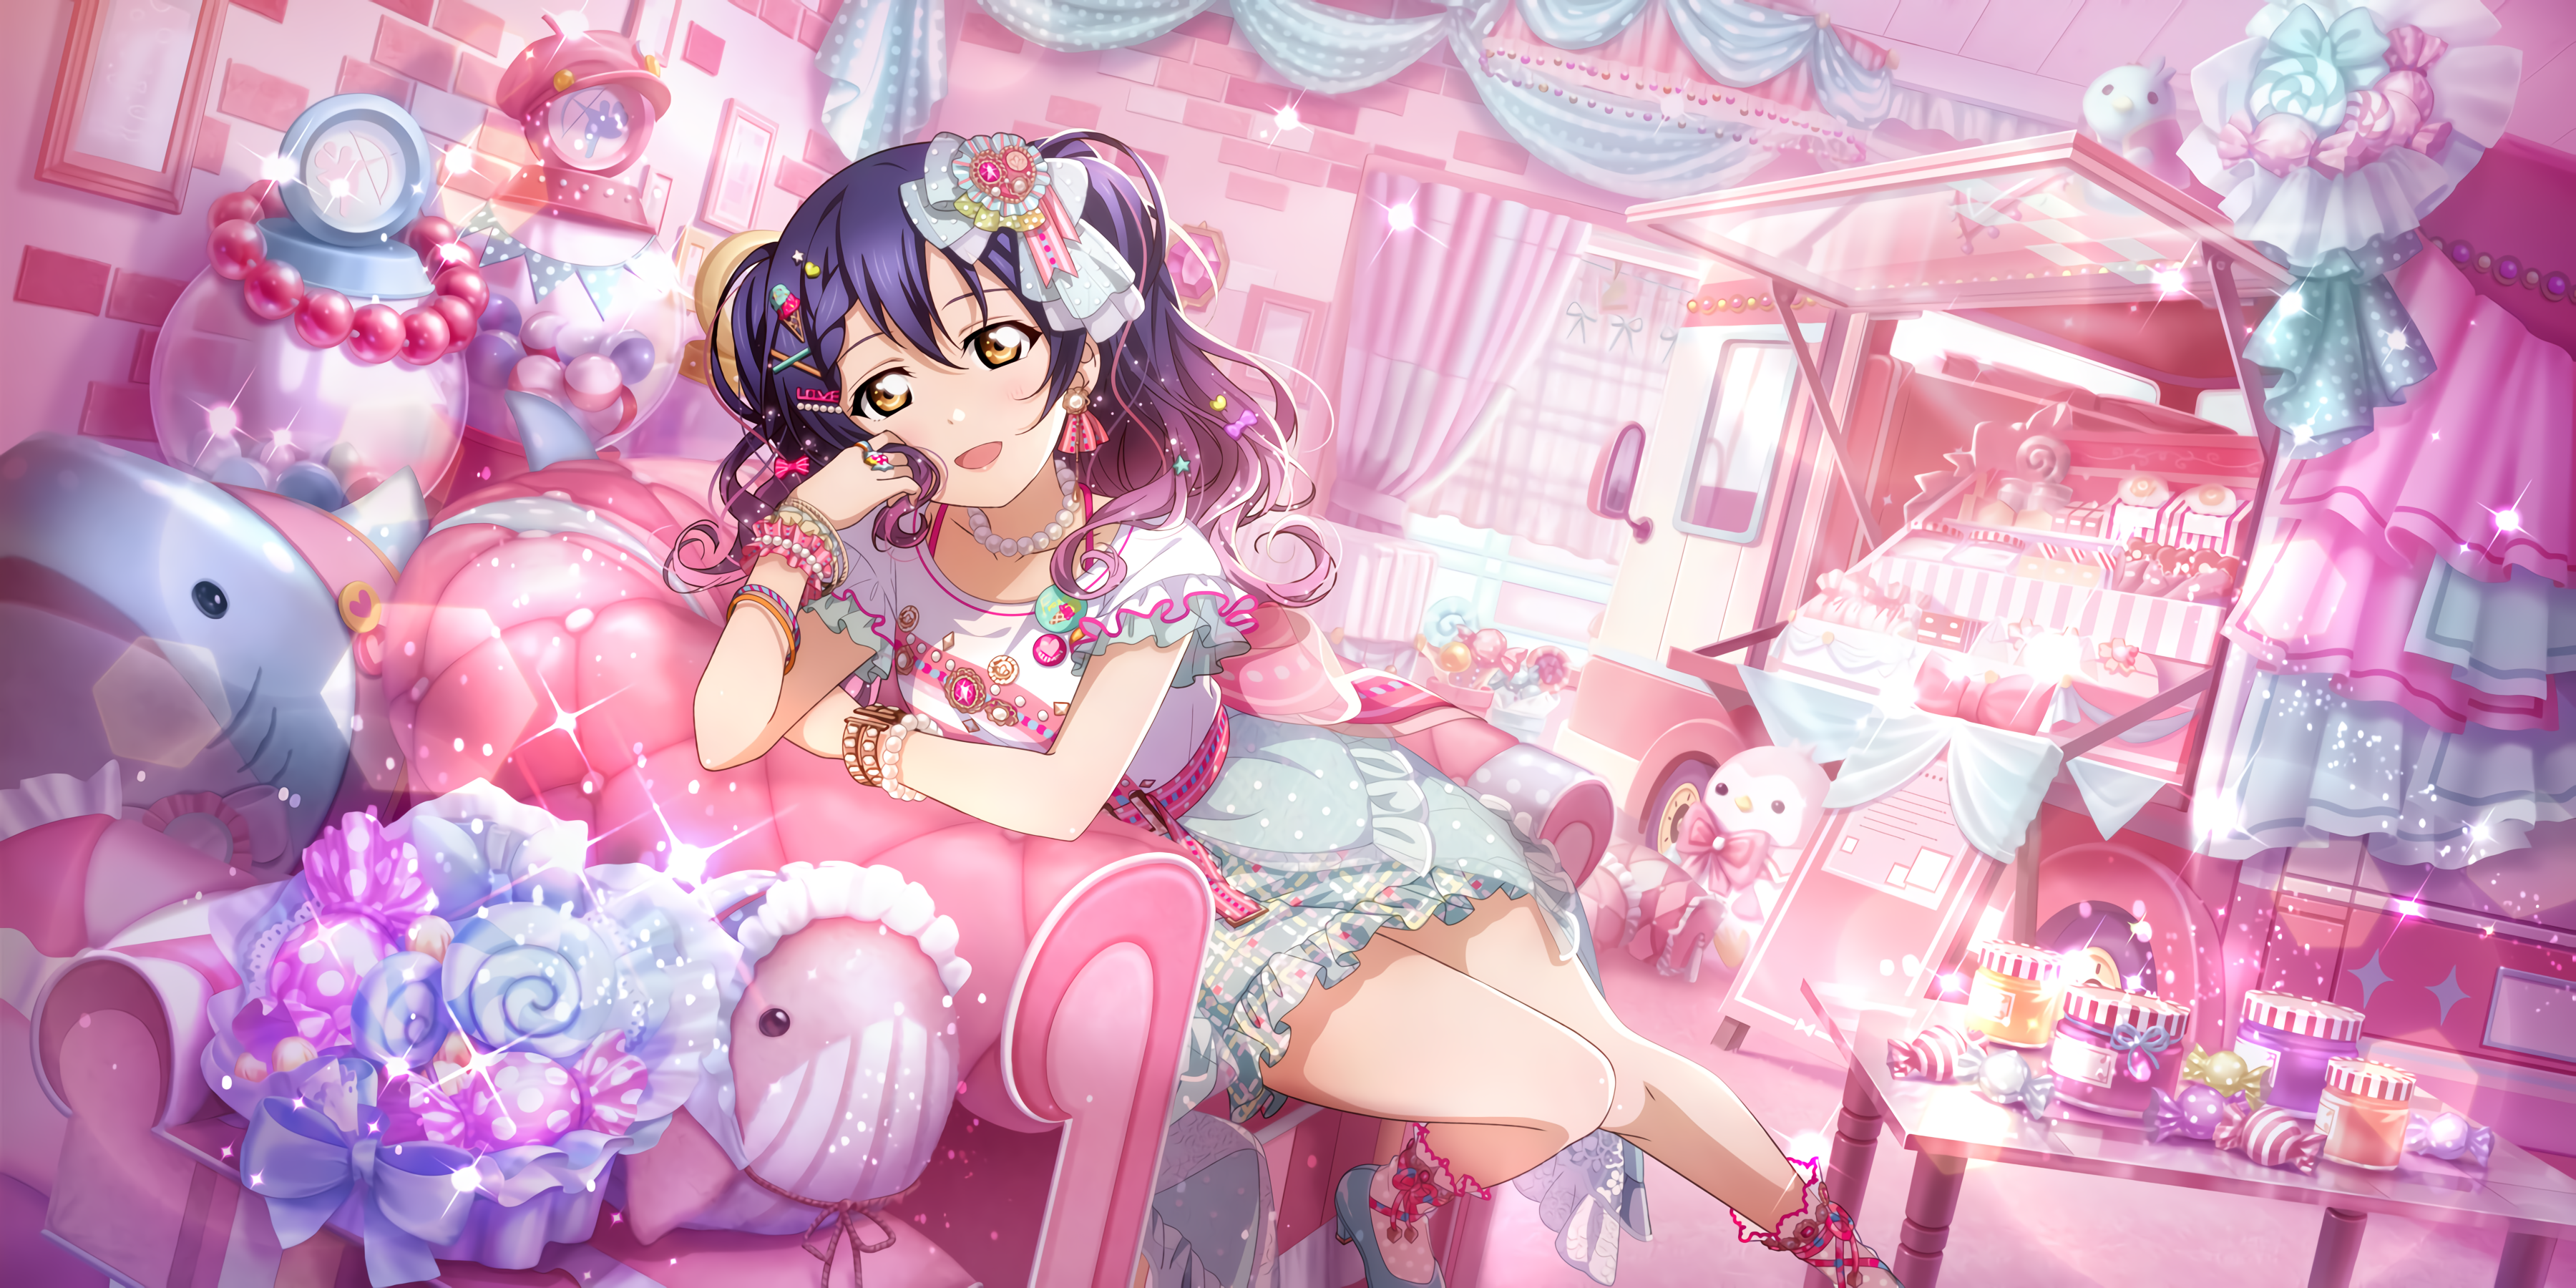 Ur Sonoda Umi I M Sure I Did Well This Time The Frontier Of Cuteness Cards List All Stars Idol Story Love Live